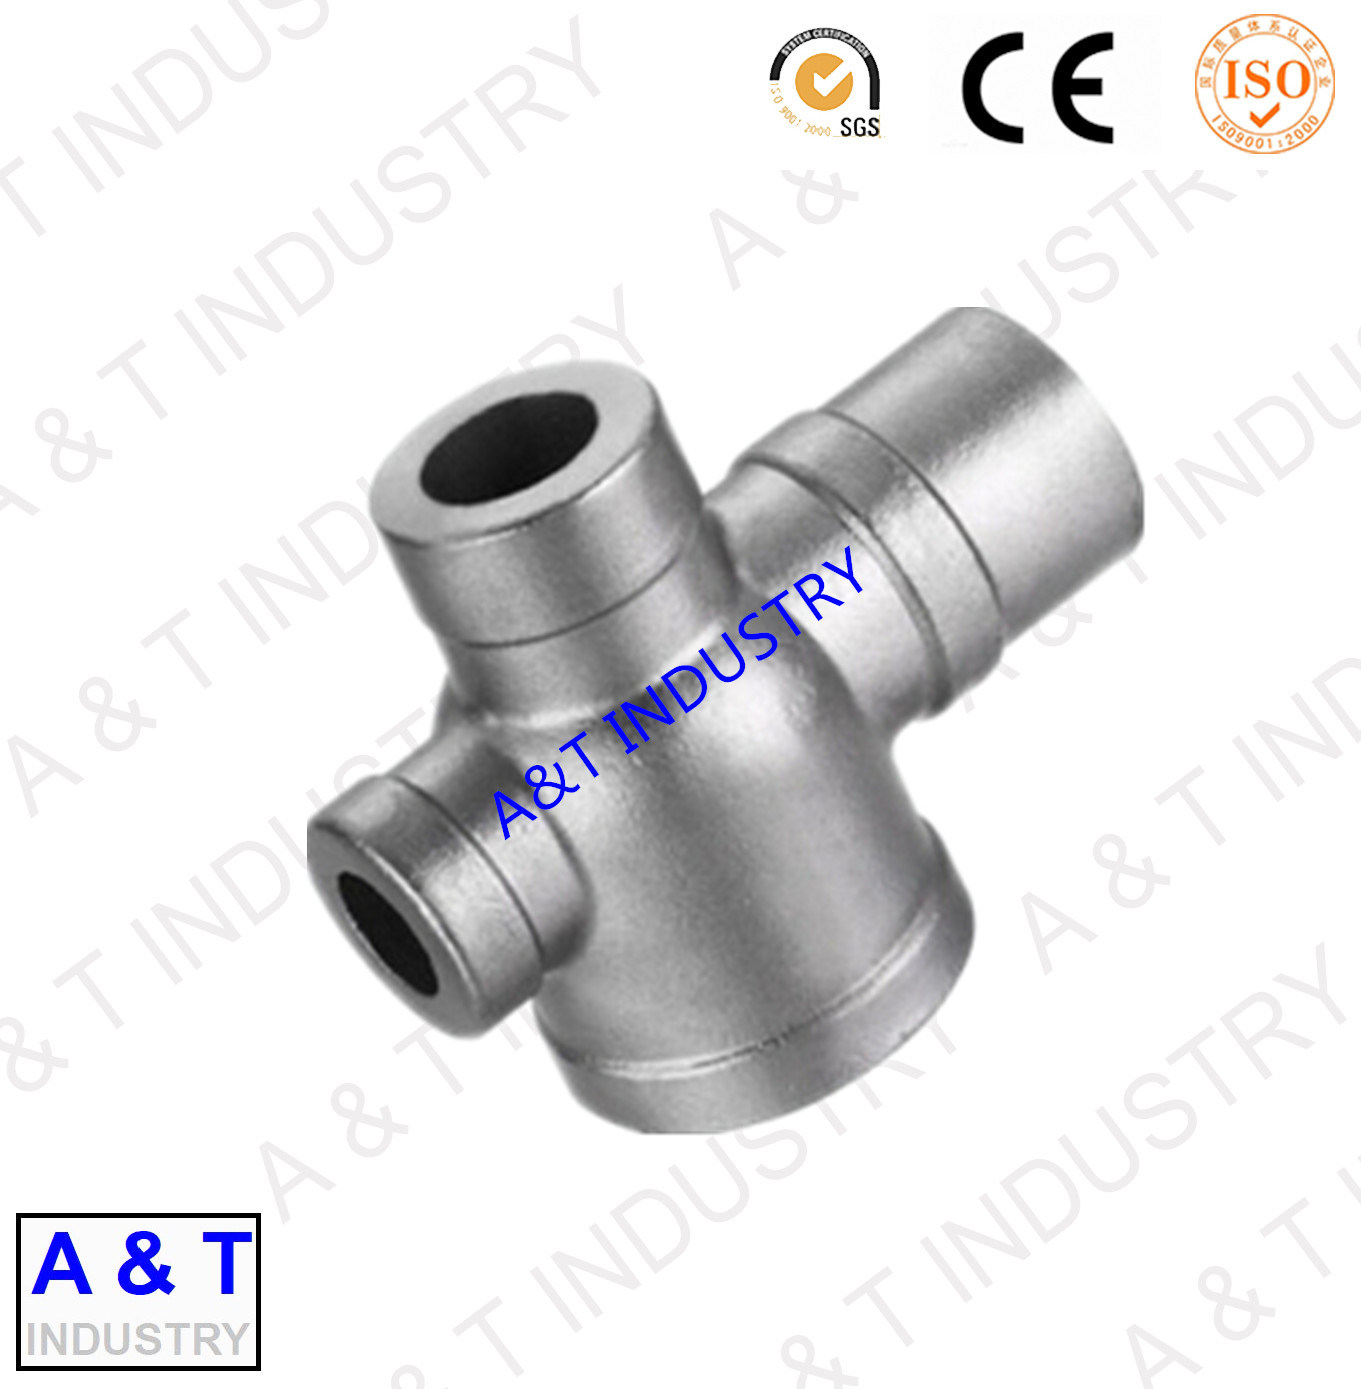 High Quality Investment Casting, Precision Casting, Lost Wax Casting Parts